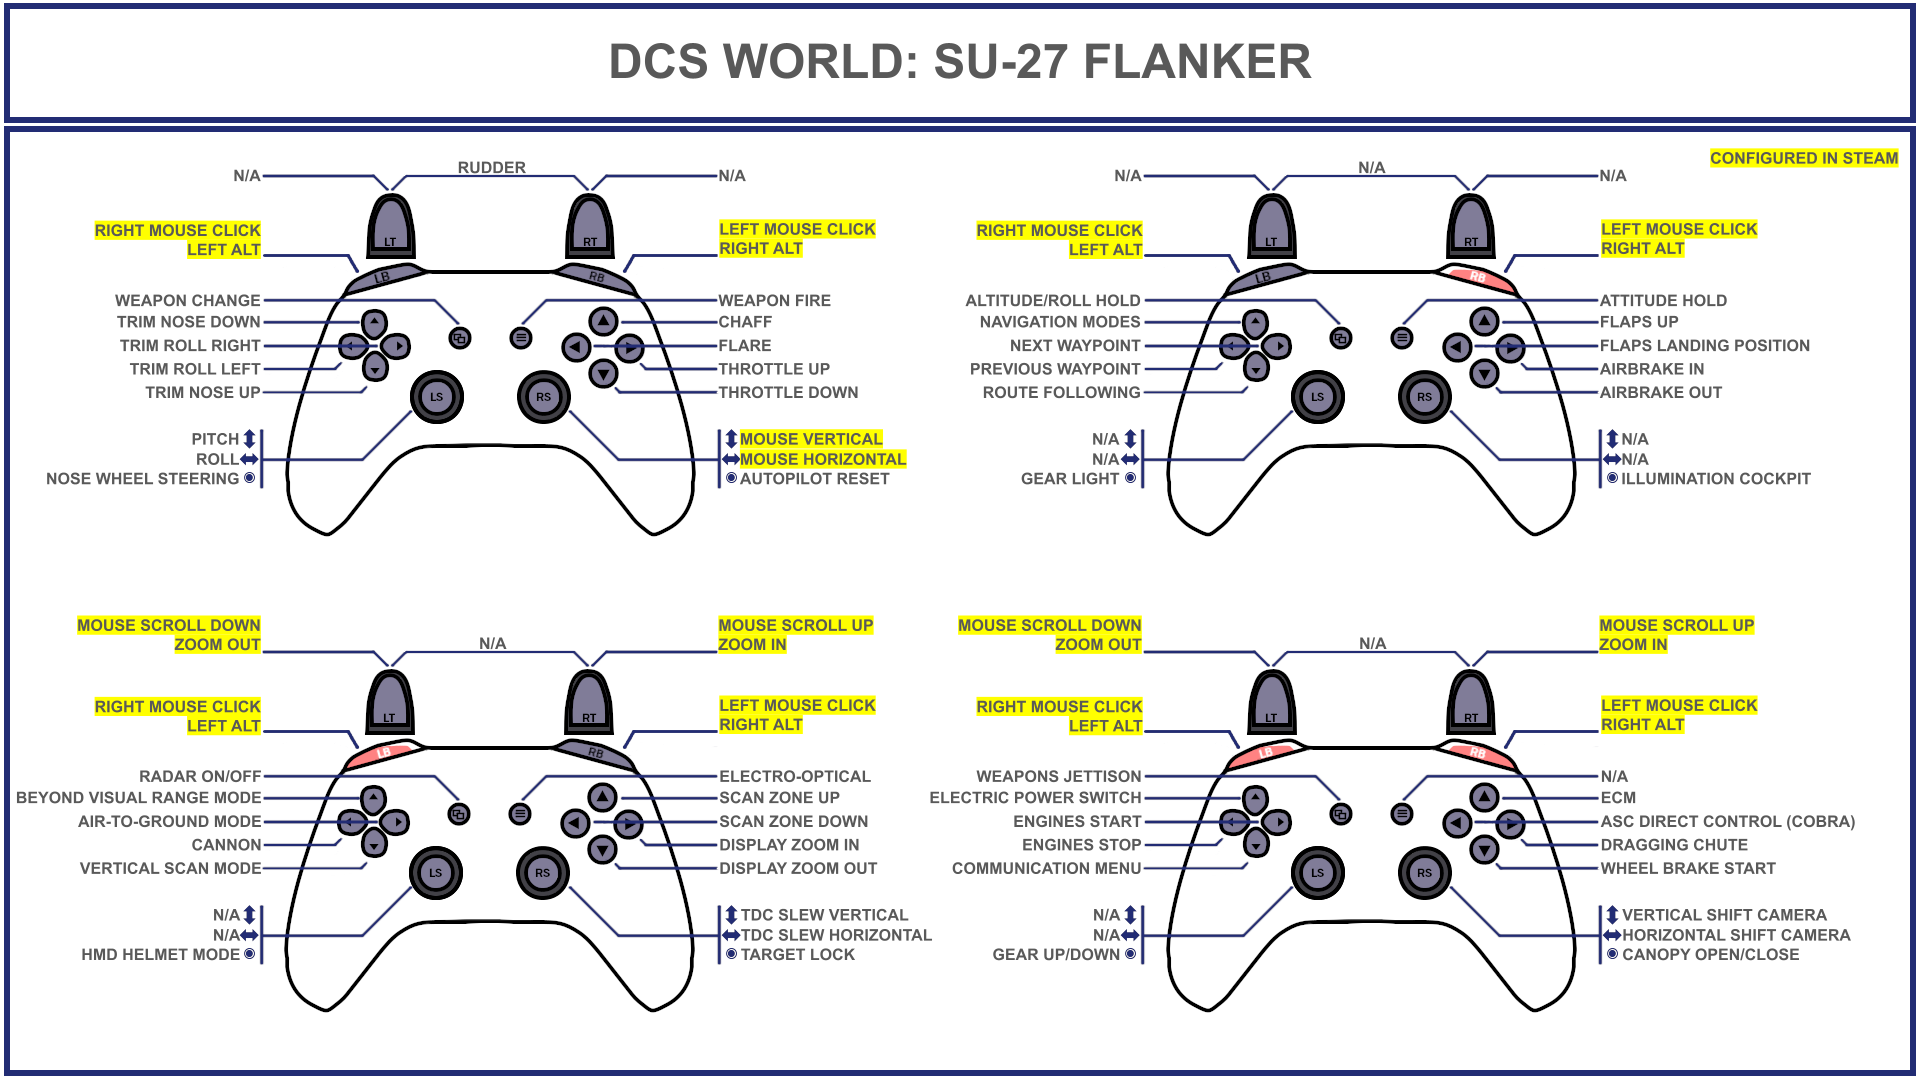 Tuuvas' Official Su-27 Flanker Gamepad Controller Layout